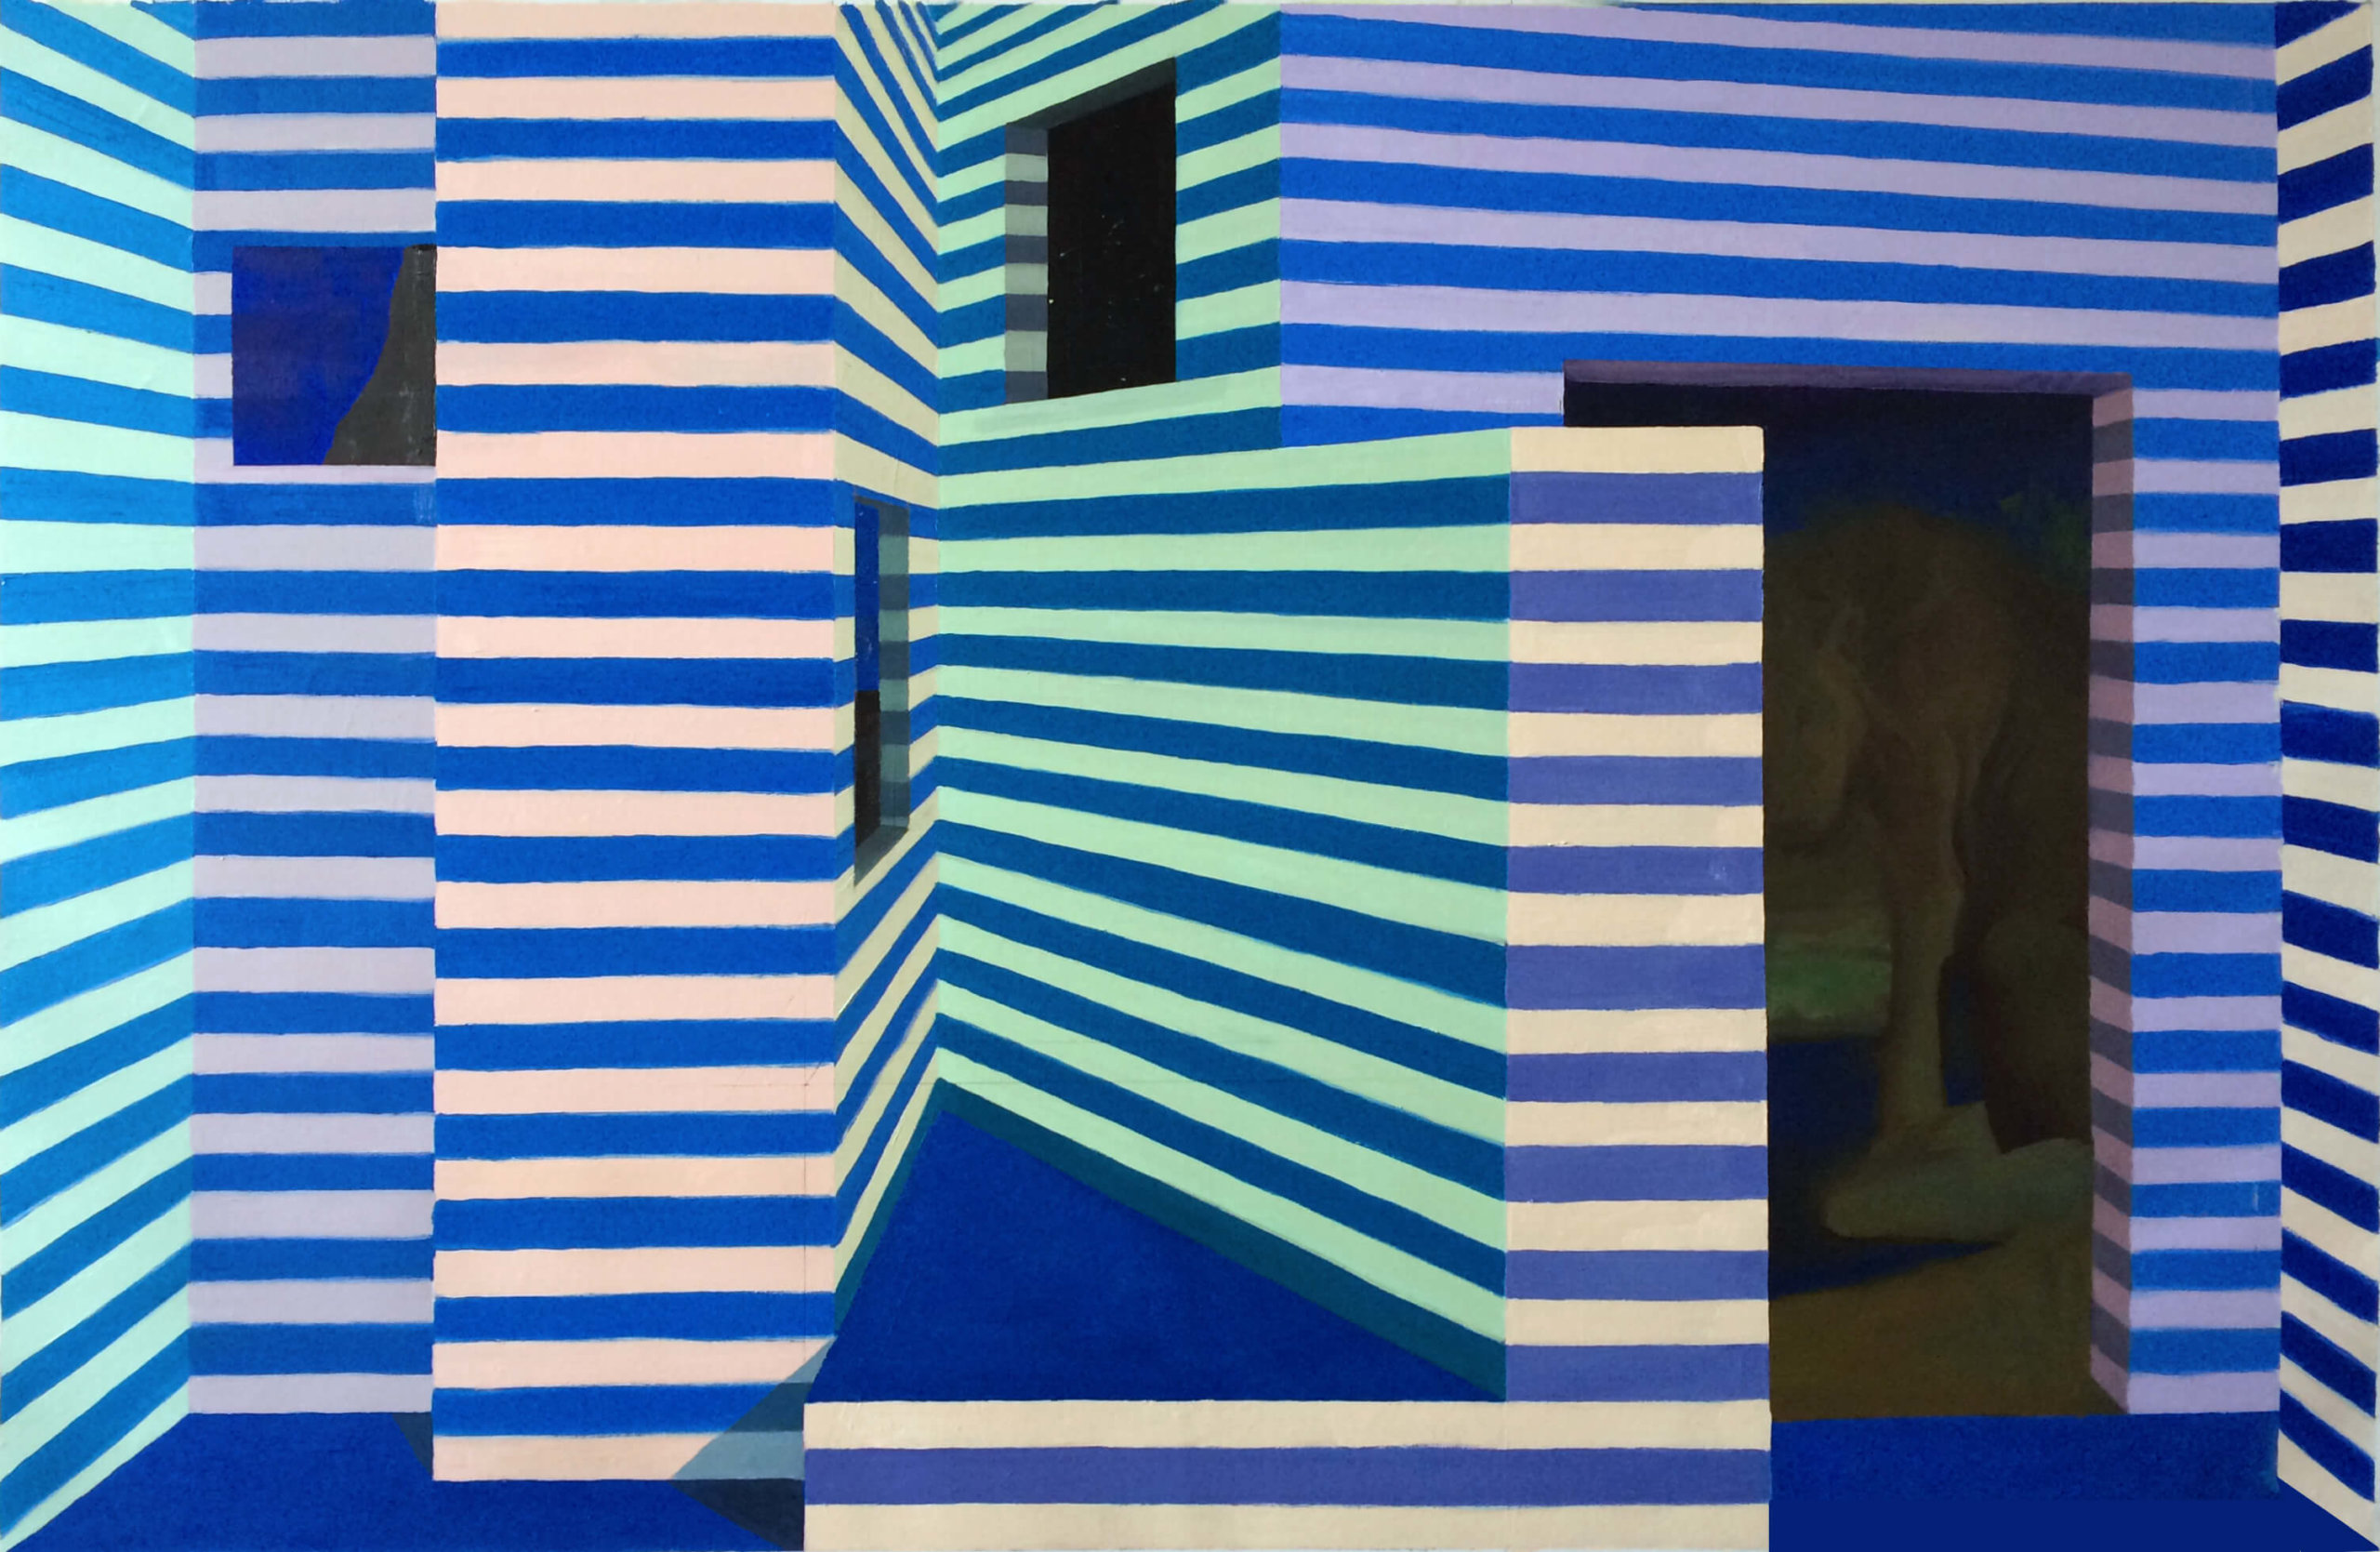 Emil Robinson, Blue Striped Interior, 2016, 72 × 50 inches, oil on linen (courtesy of the artist)